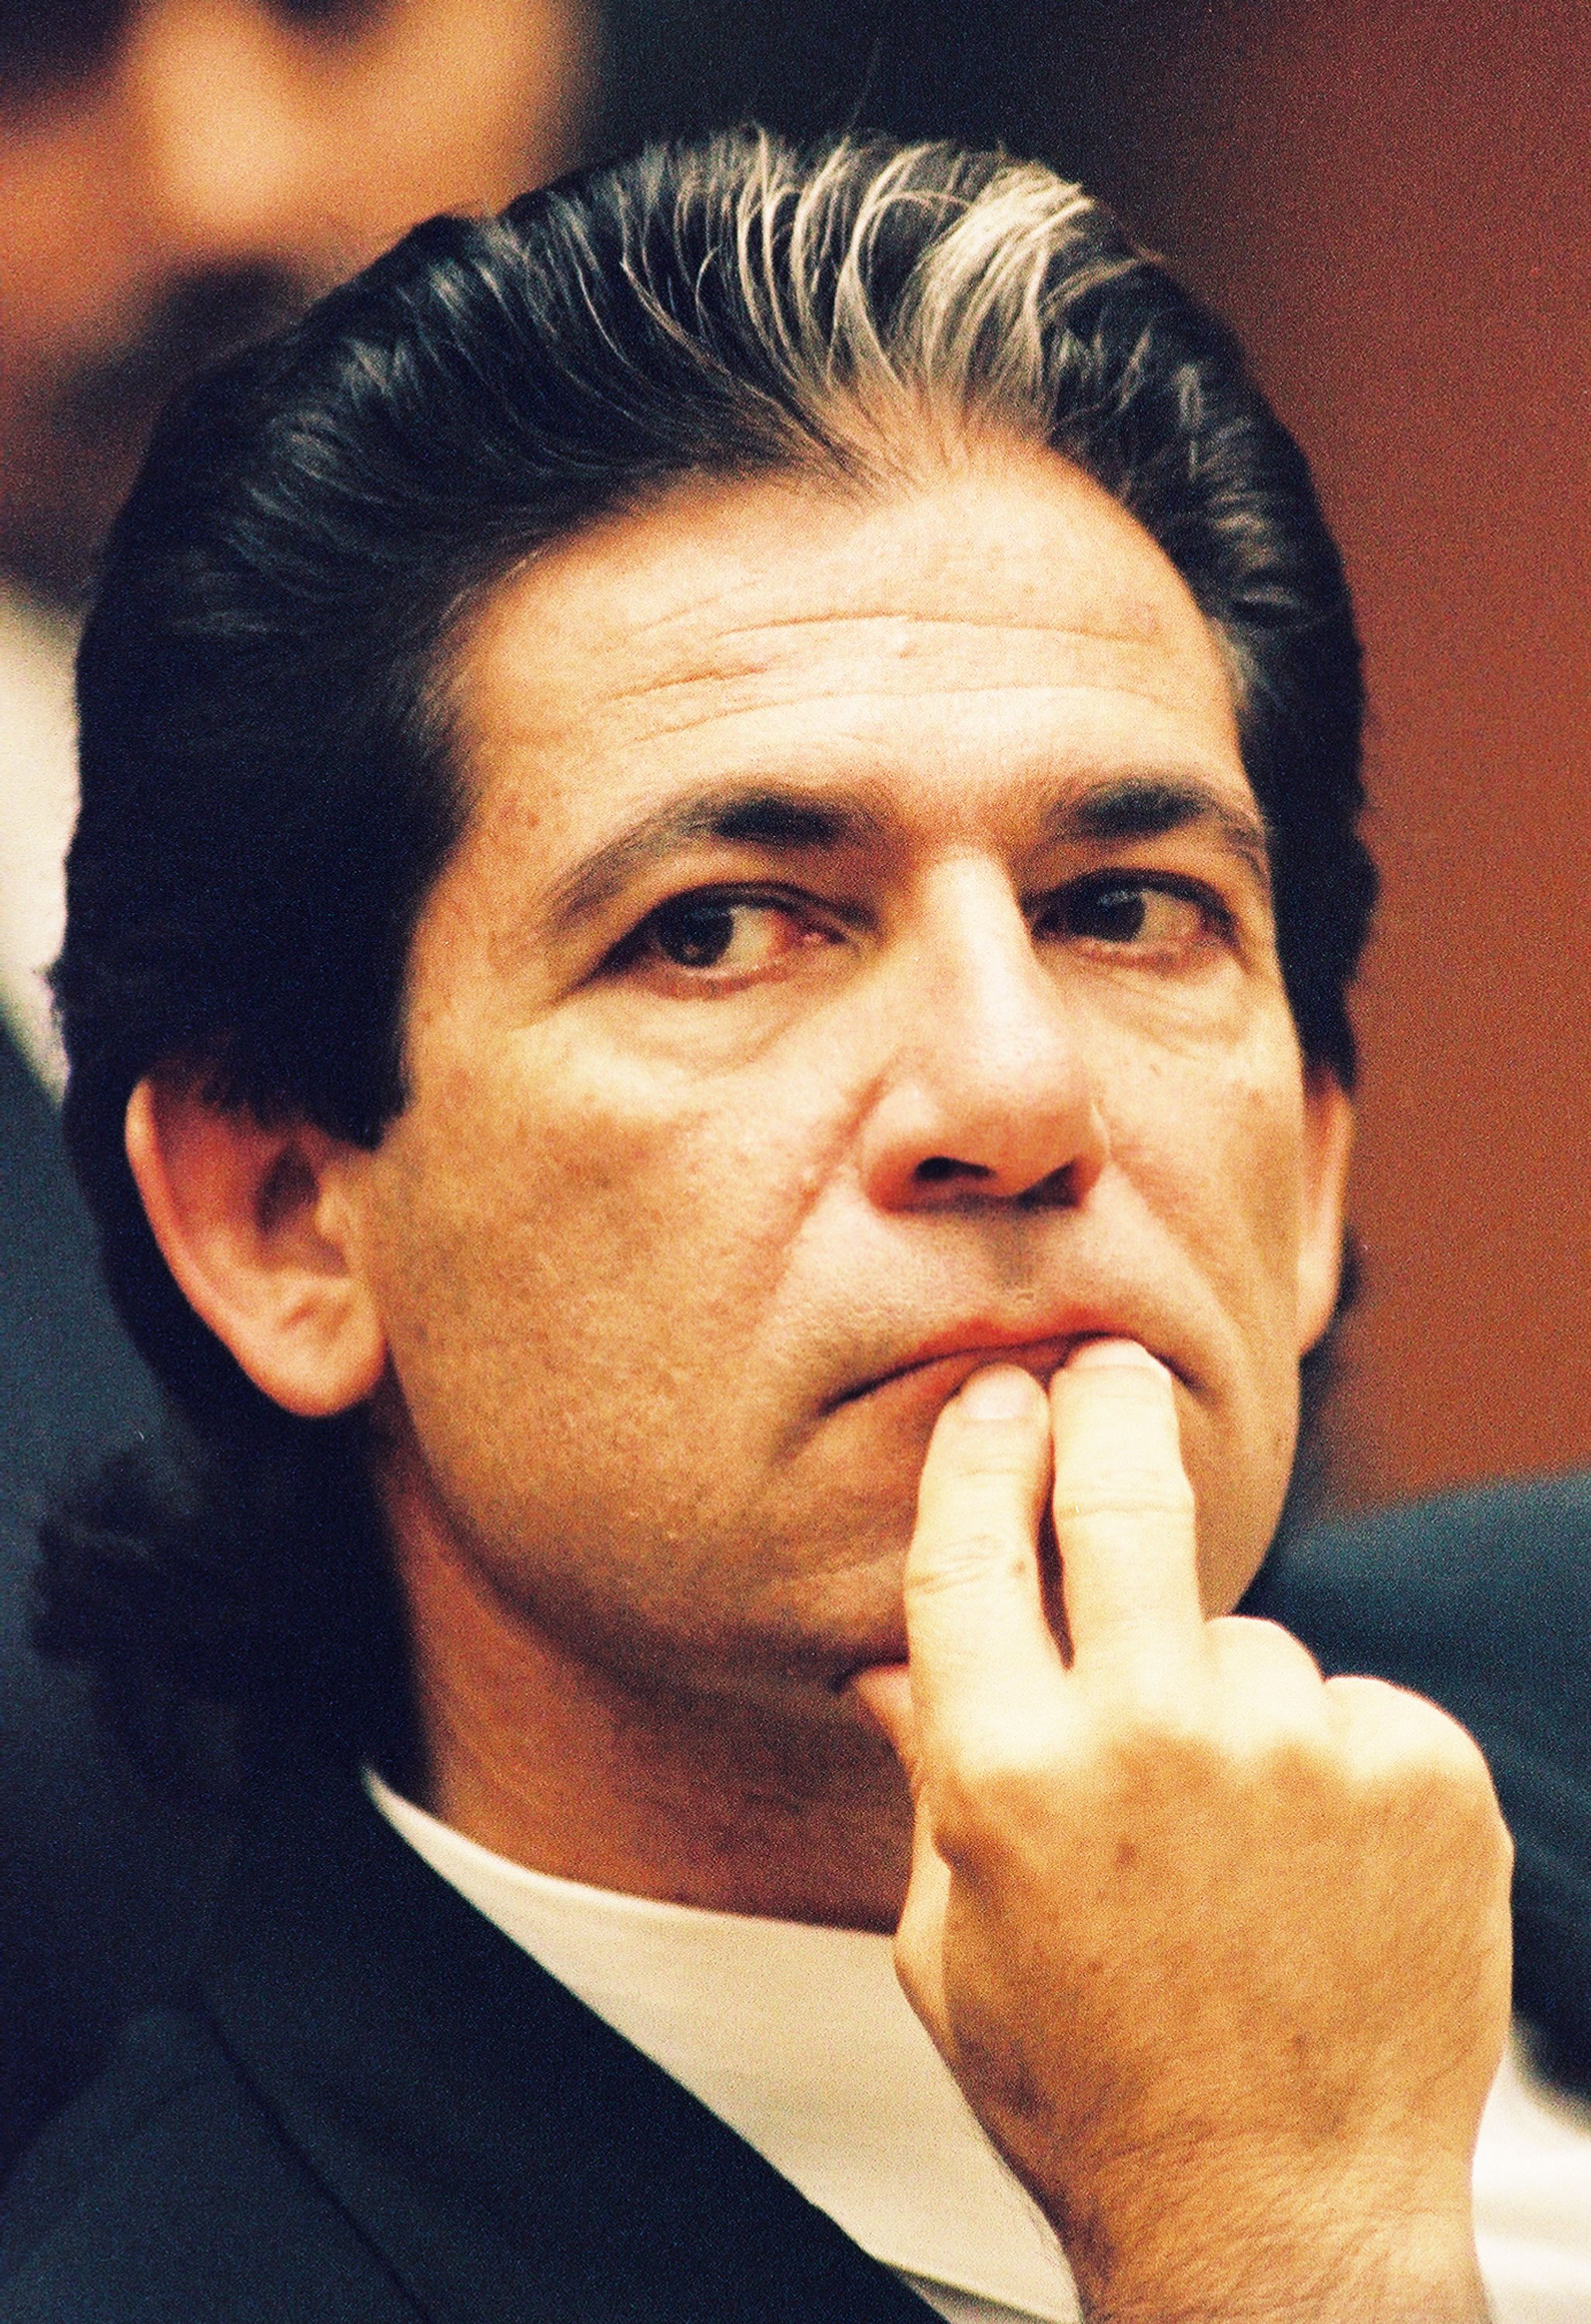 Robert Kardashian, during a preliminary hearing after the murders of Nicole Brown Simpson and Ronald Goldman in Los Angeles on July 7, 1994. | Source: Getty Images